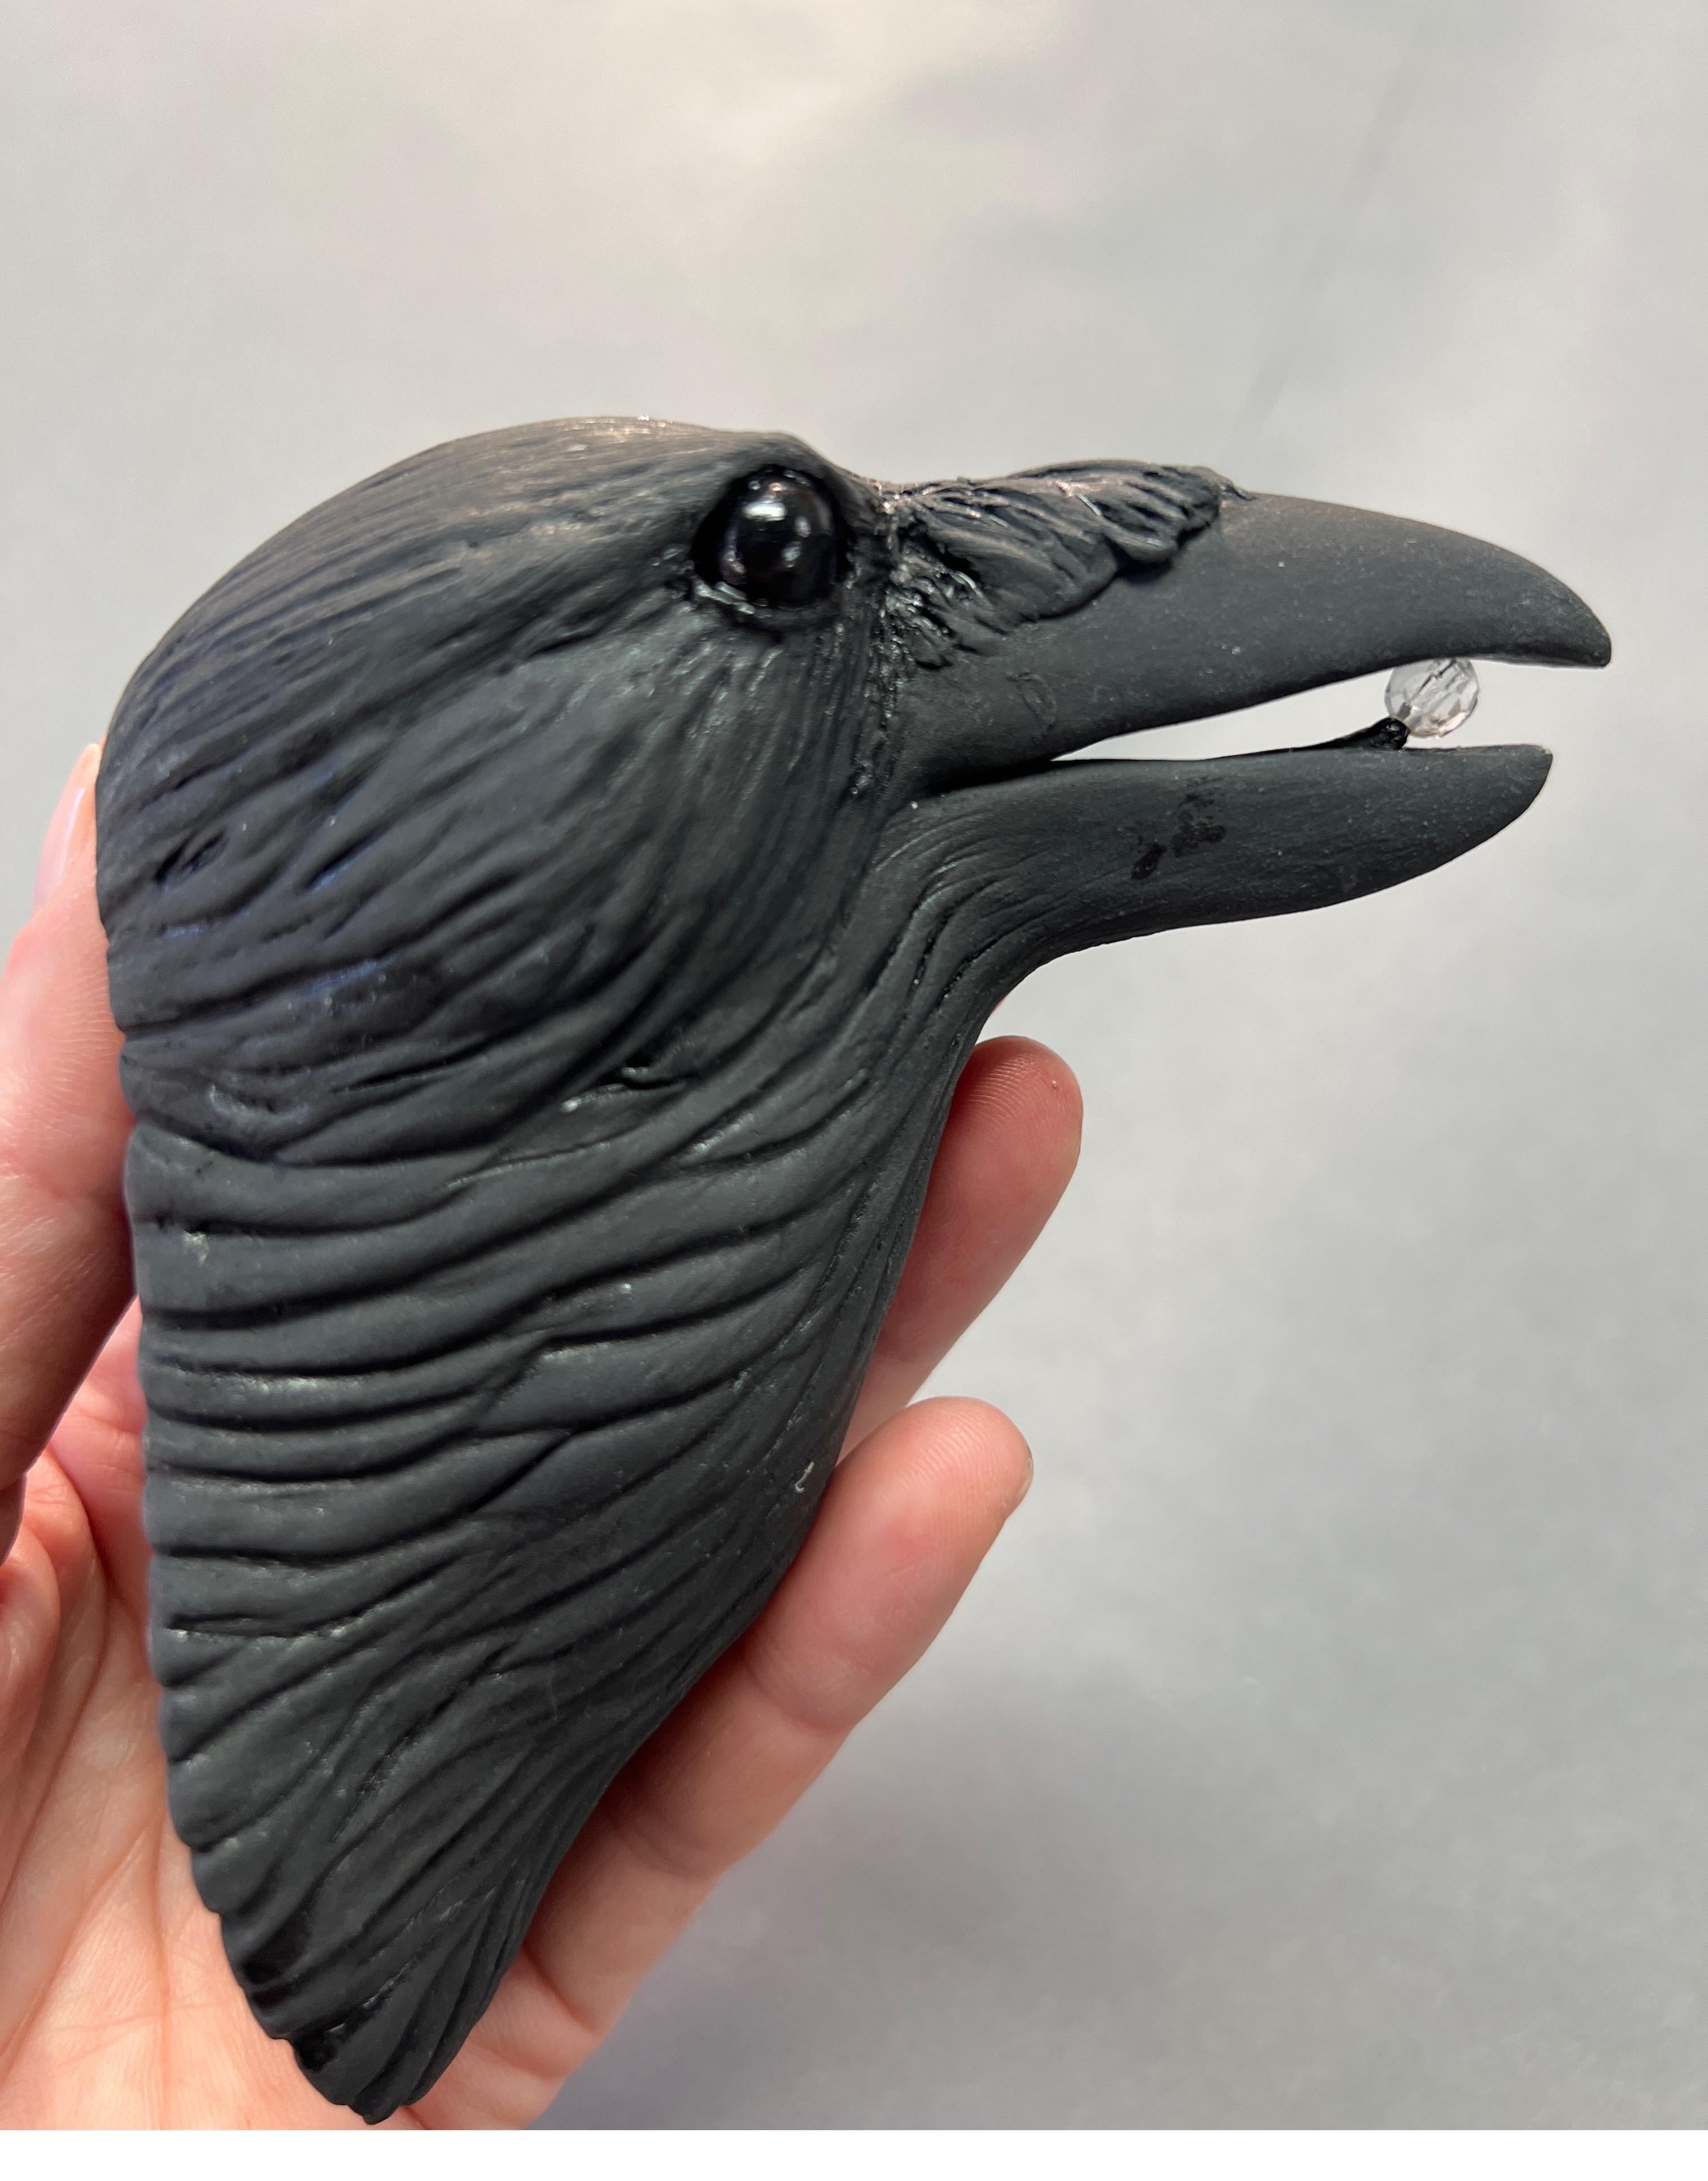 Ceramic Wall Sculpture of Crow #9 with Crystal in Beak 1